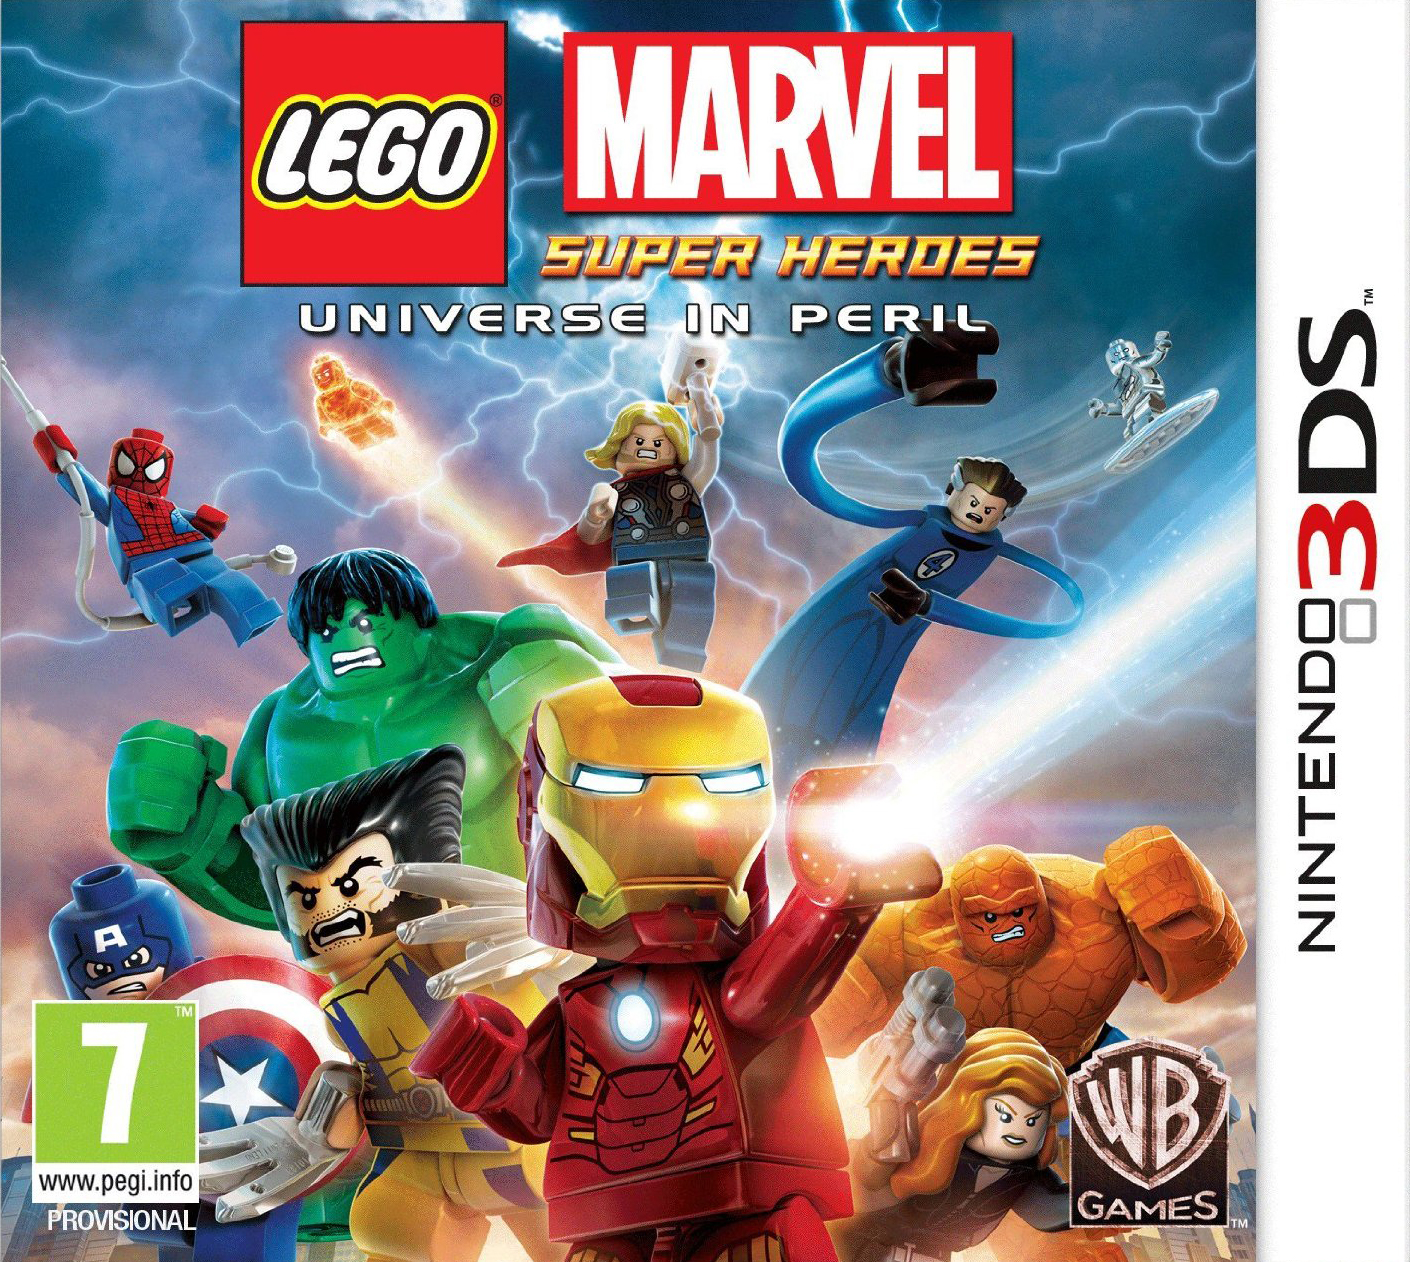 Image of Lego Marvel Super Heroes: Universe in Peril